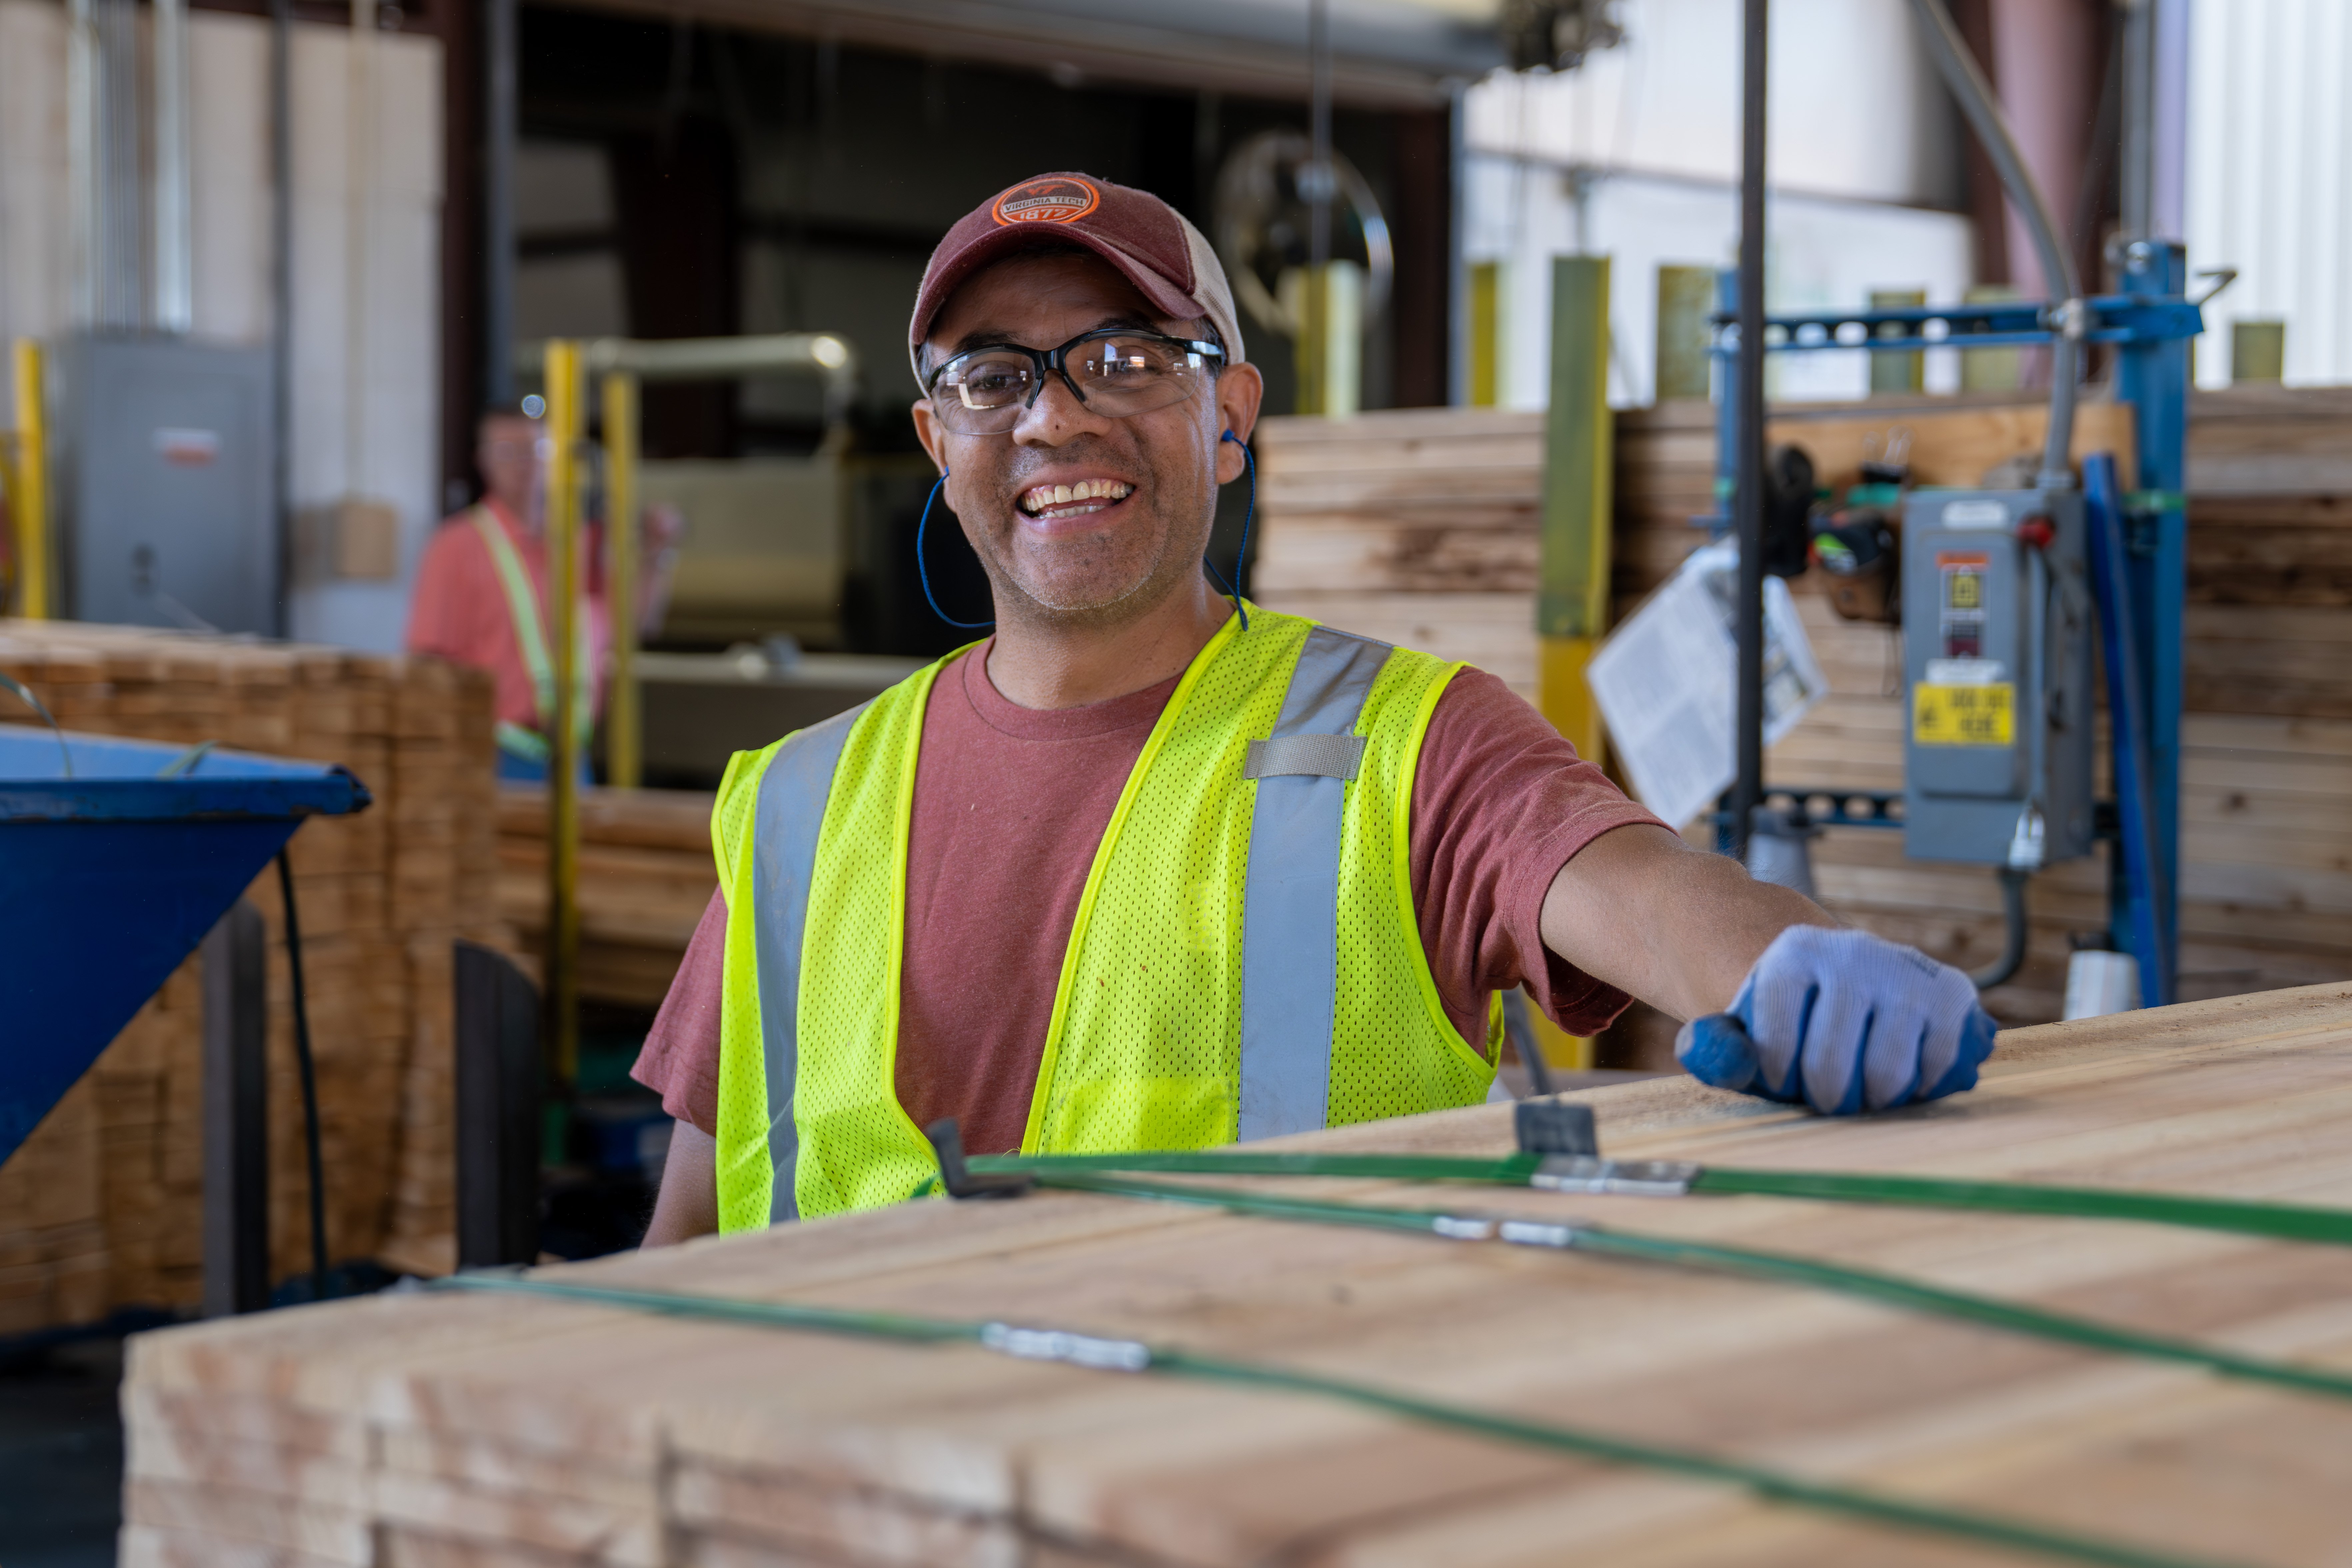 Smiling worker with safety glasses and vest